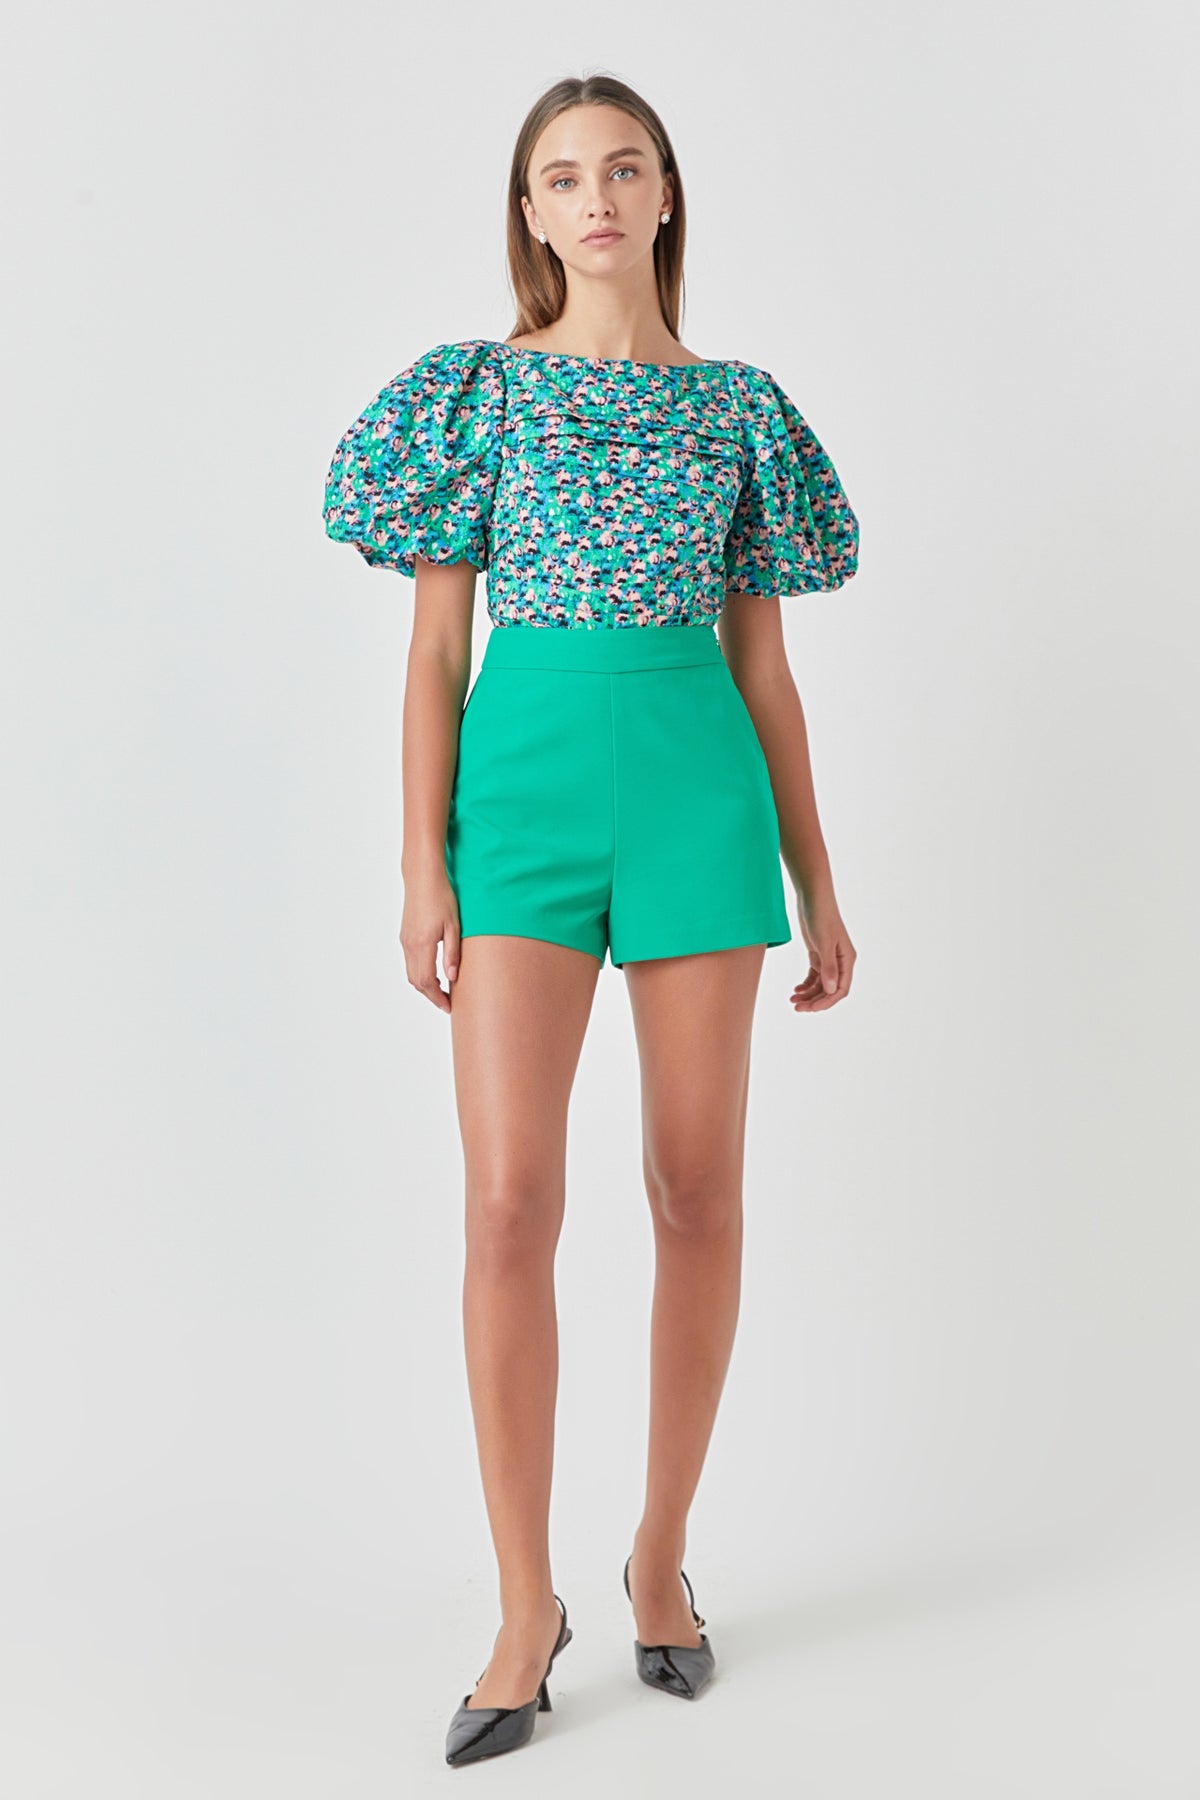 ENDLESS ROSE - Bright Floral Ruched Poplin Top - TOPS available at Objectrare